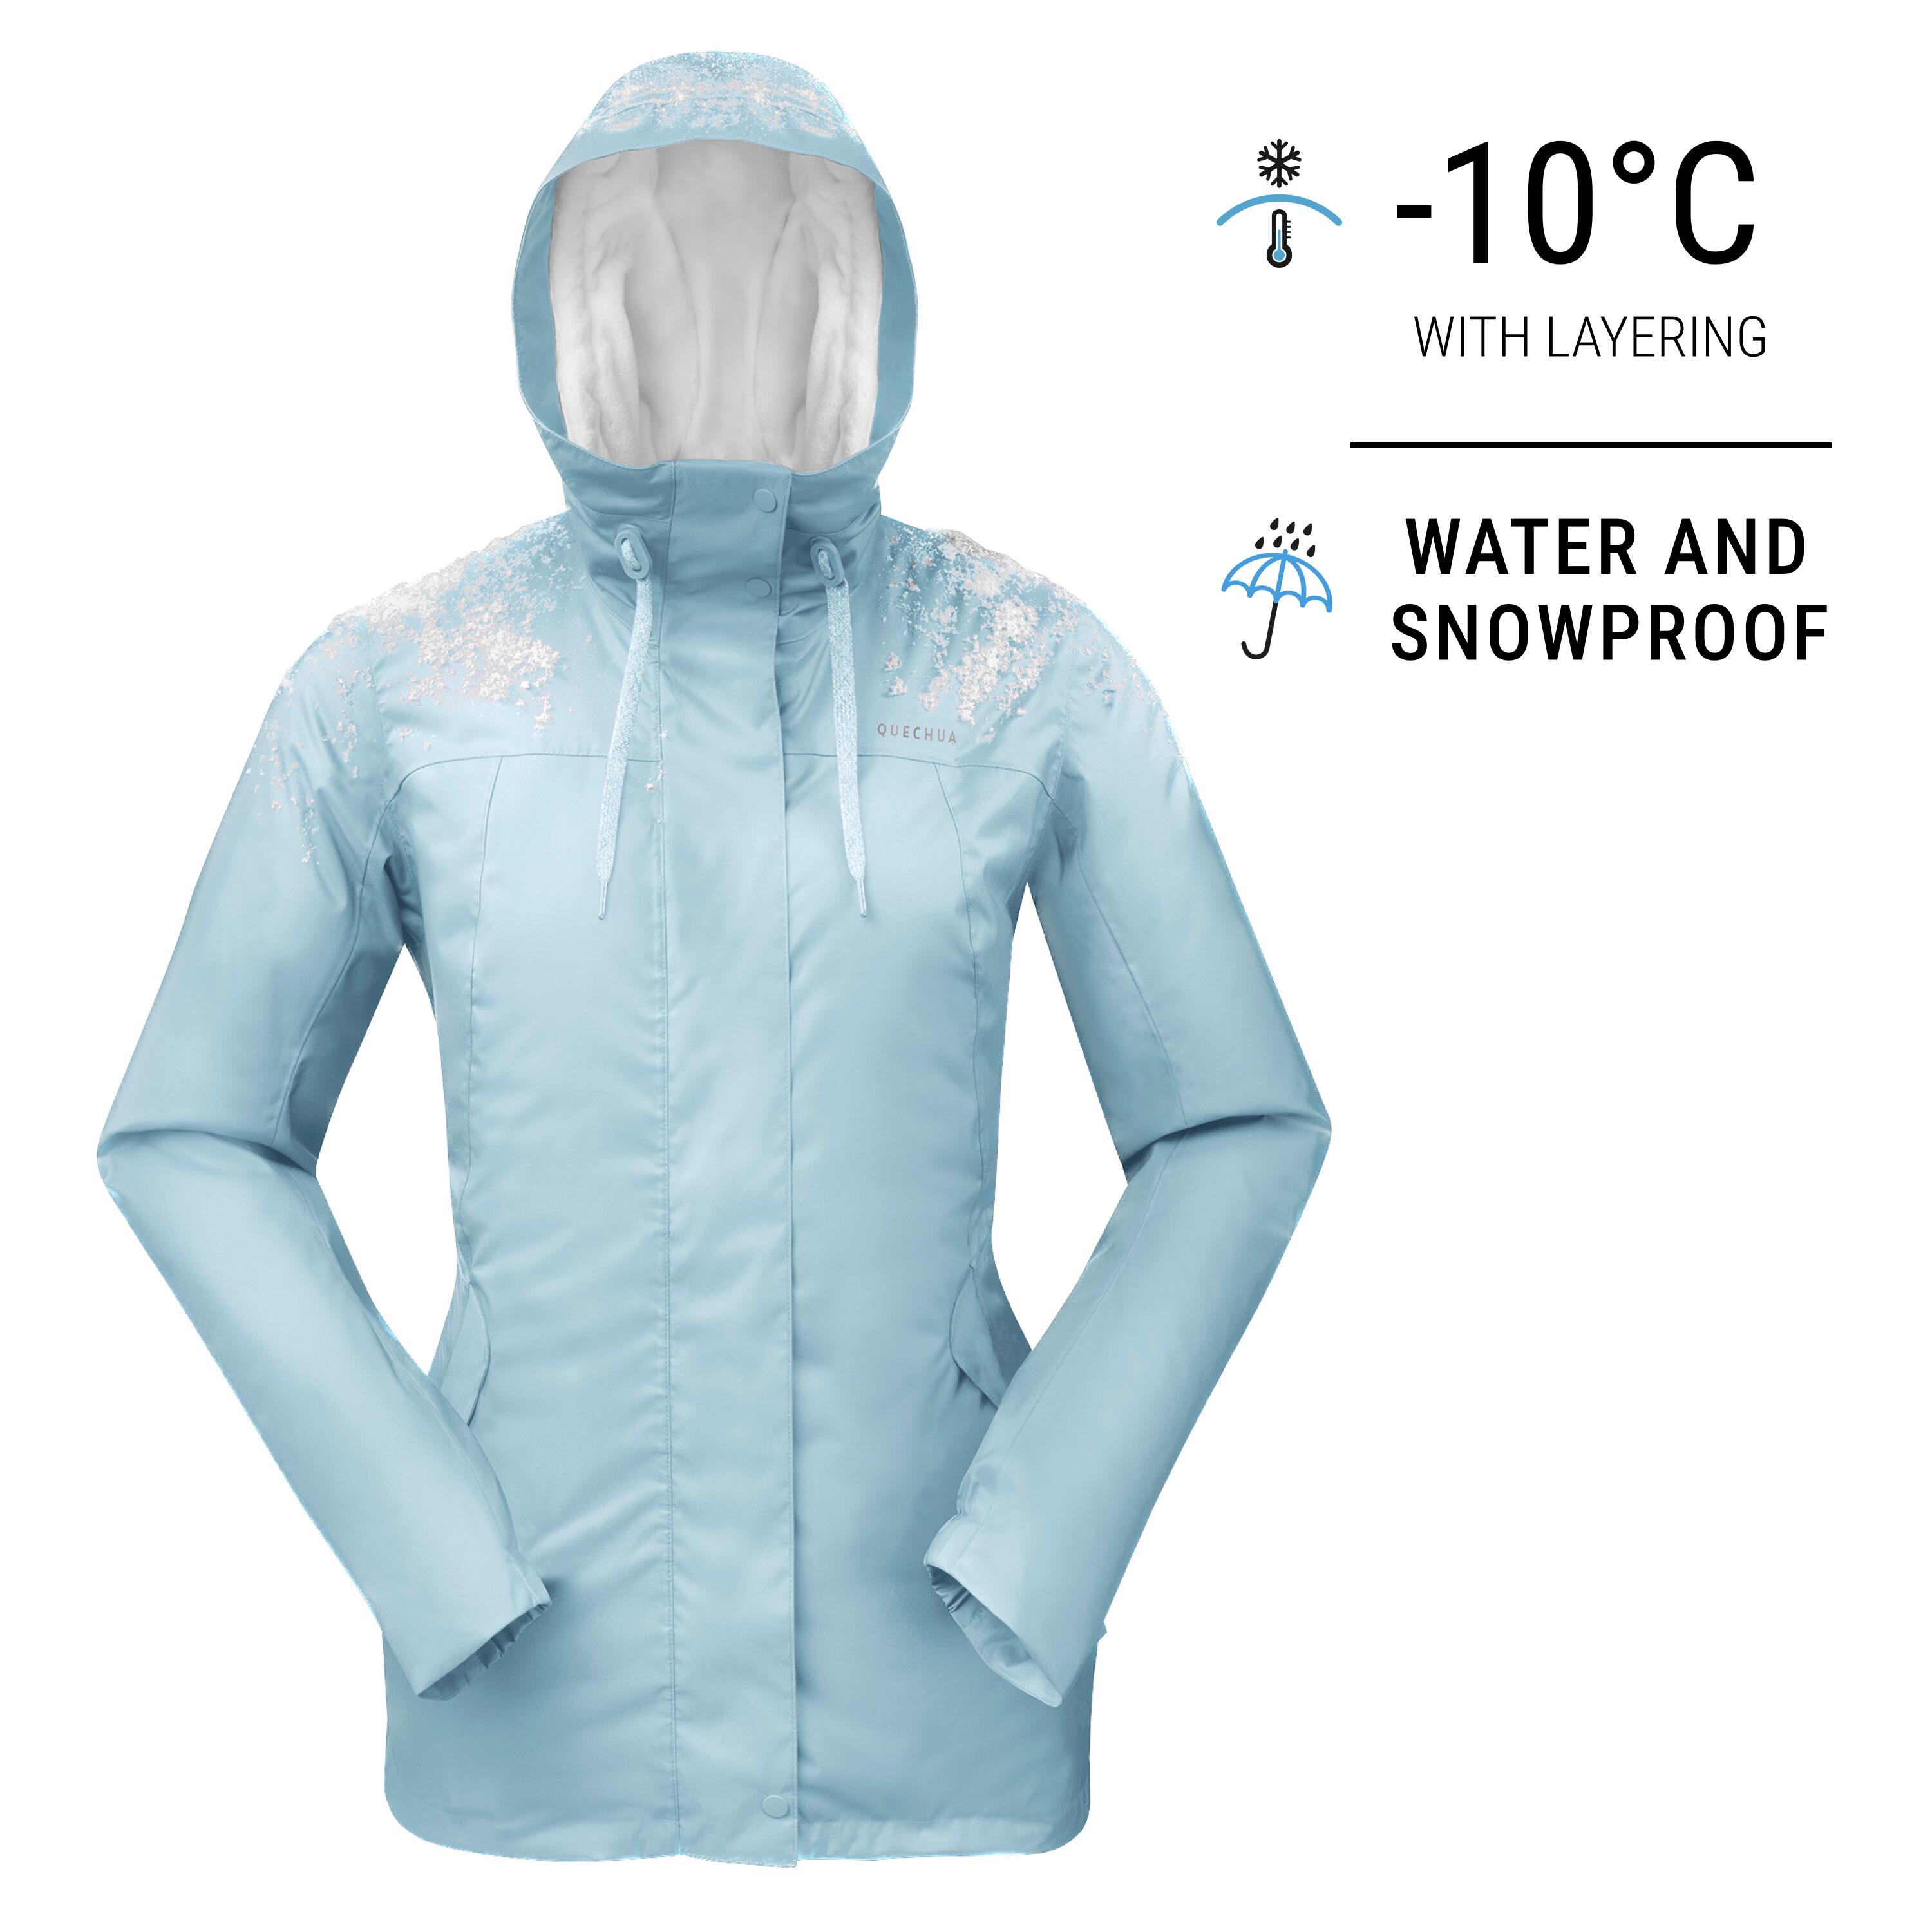 Winter jacket | Are you ready to travel? | By Decathlon Sports IndiaFacebook